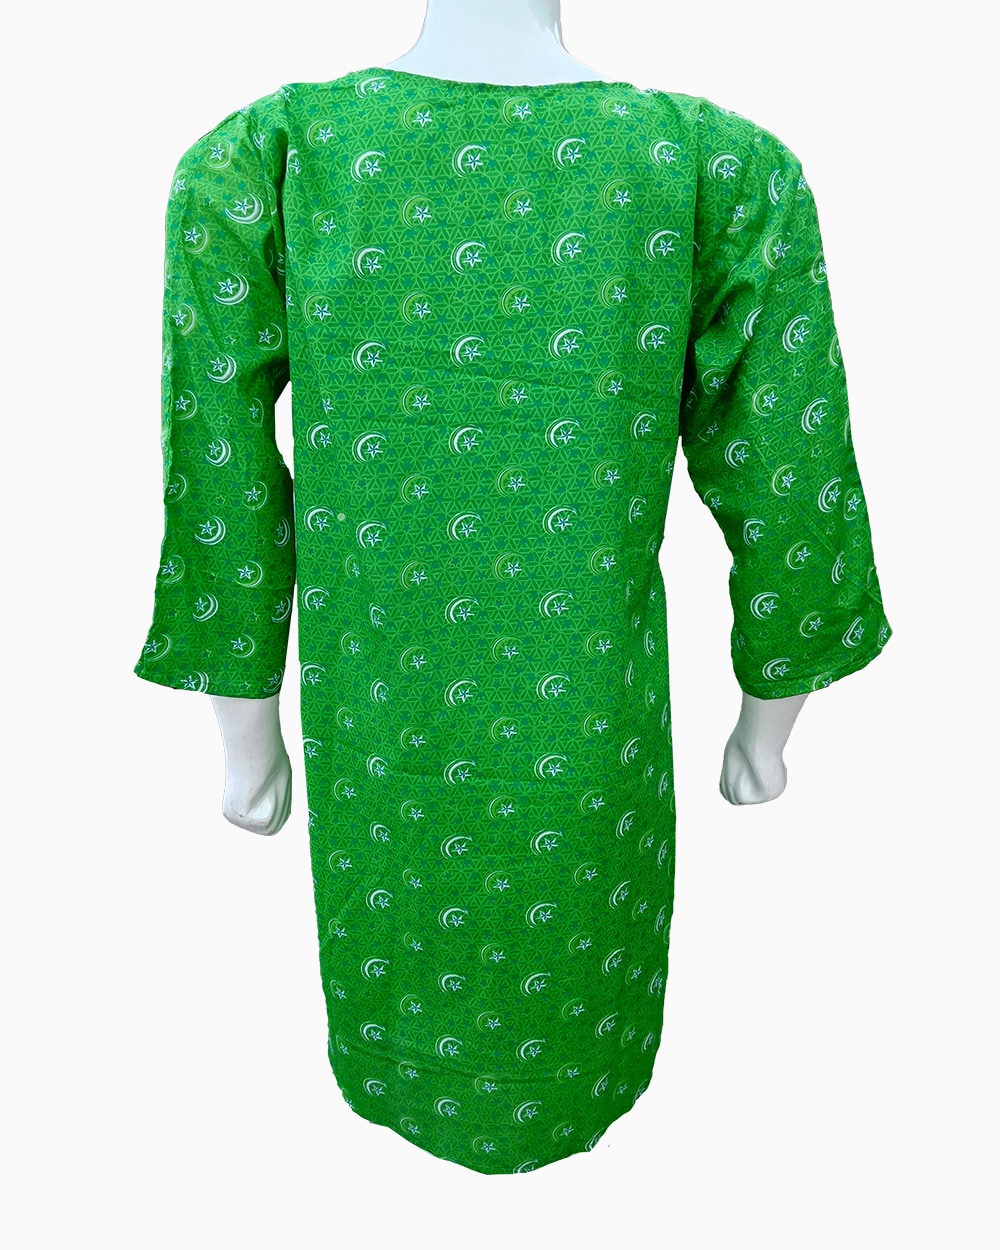 independence day green kurti online - 3